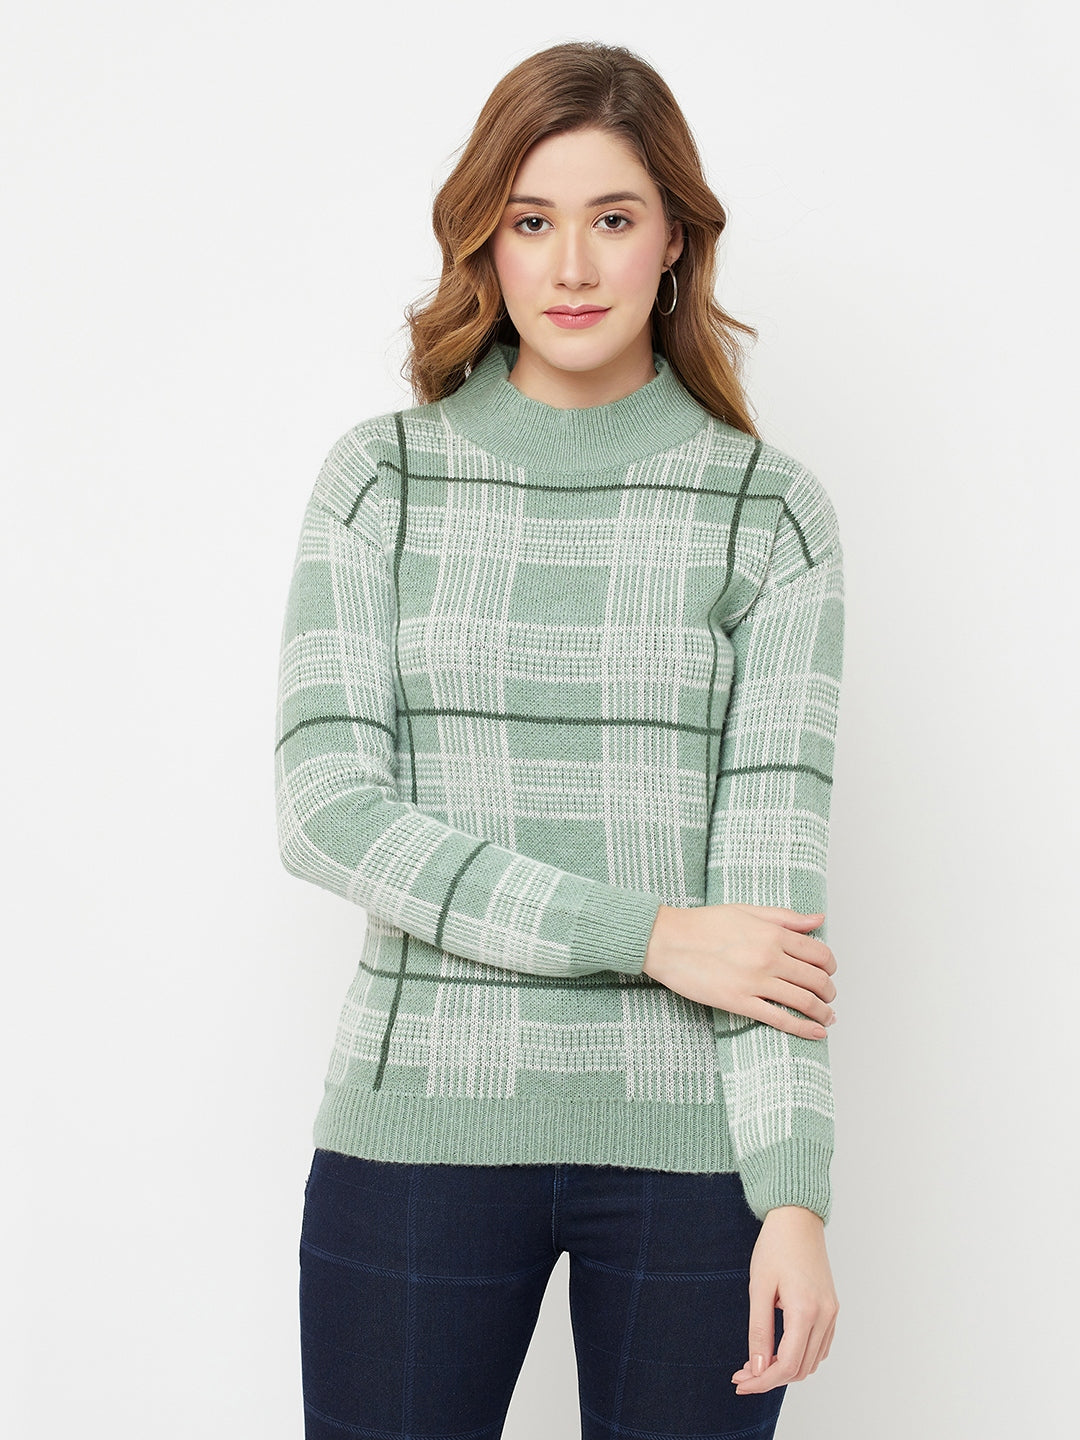 Green Checked Mock Neck Sweater - Women Sweaters